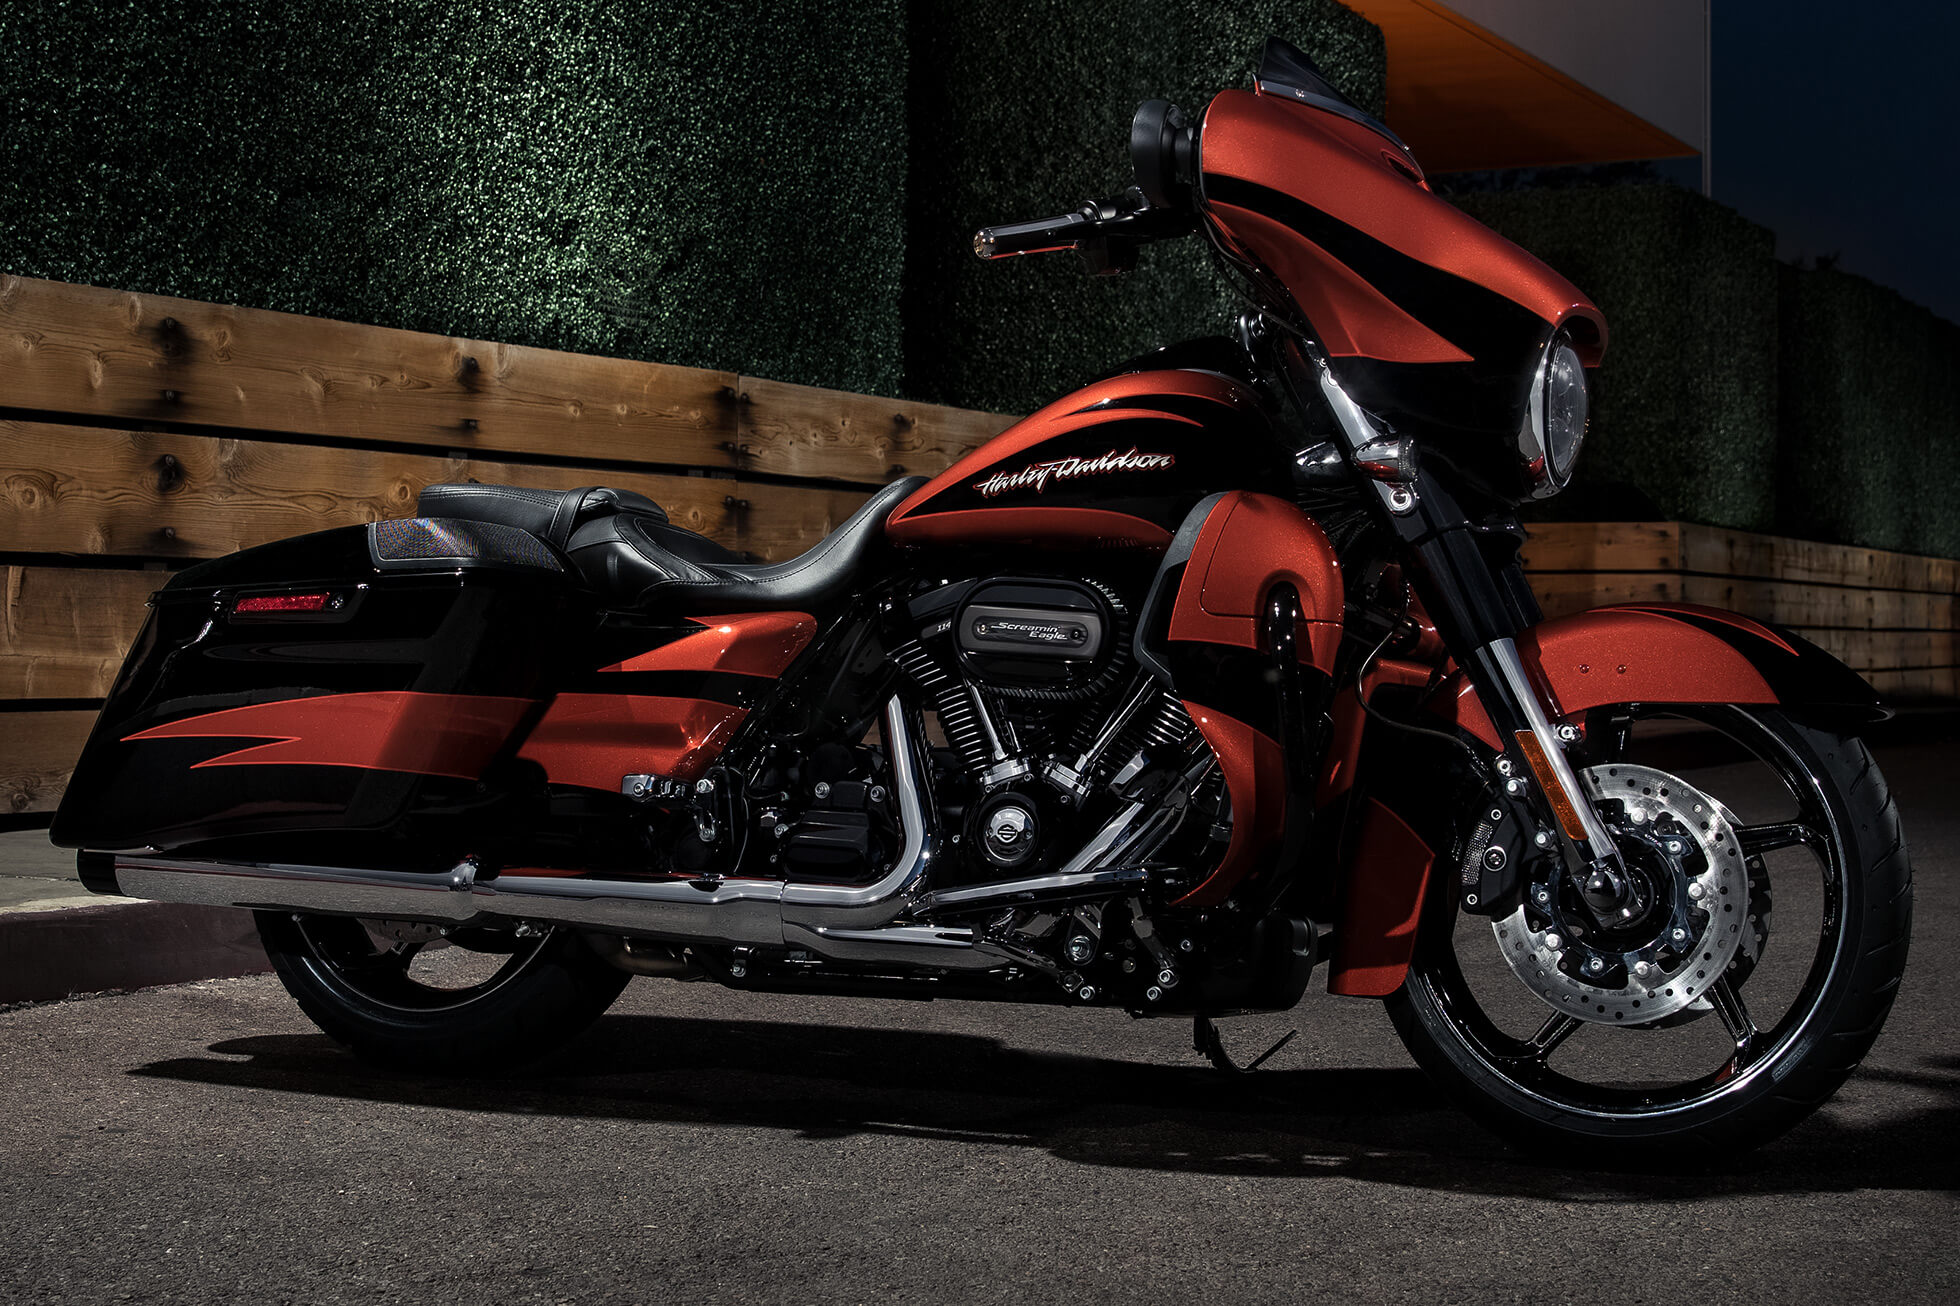 Harley-davidson street glide special price - mileage, images, colours | bikewale